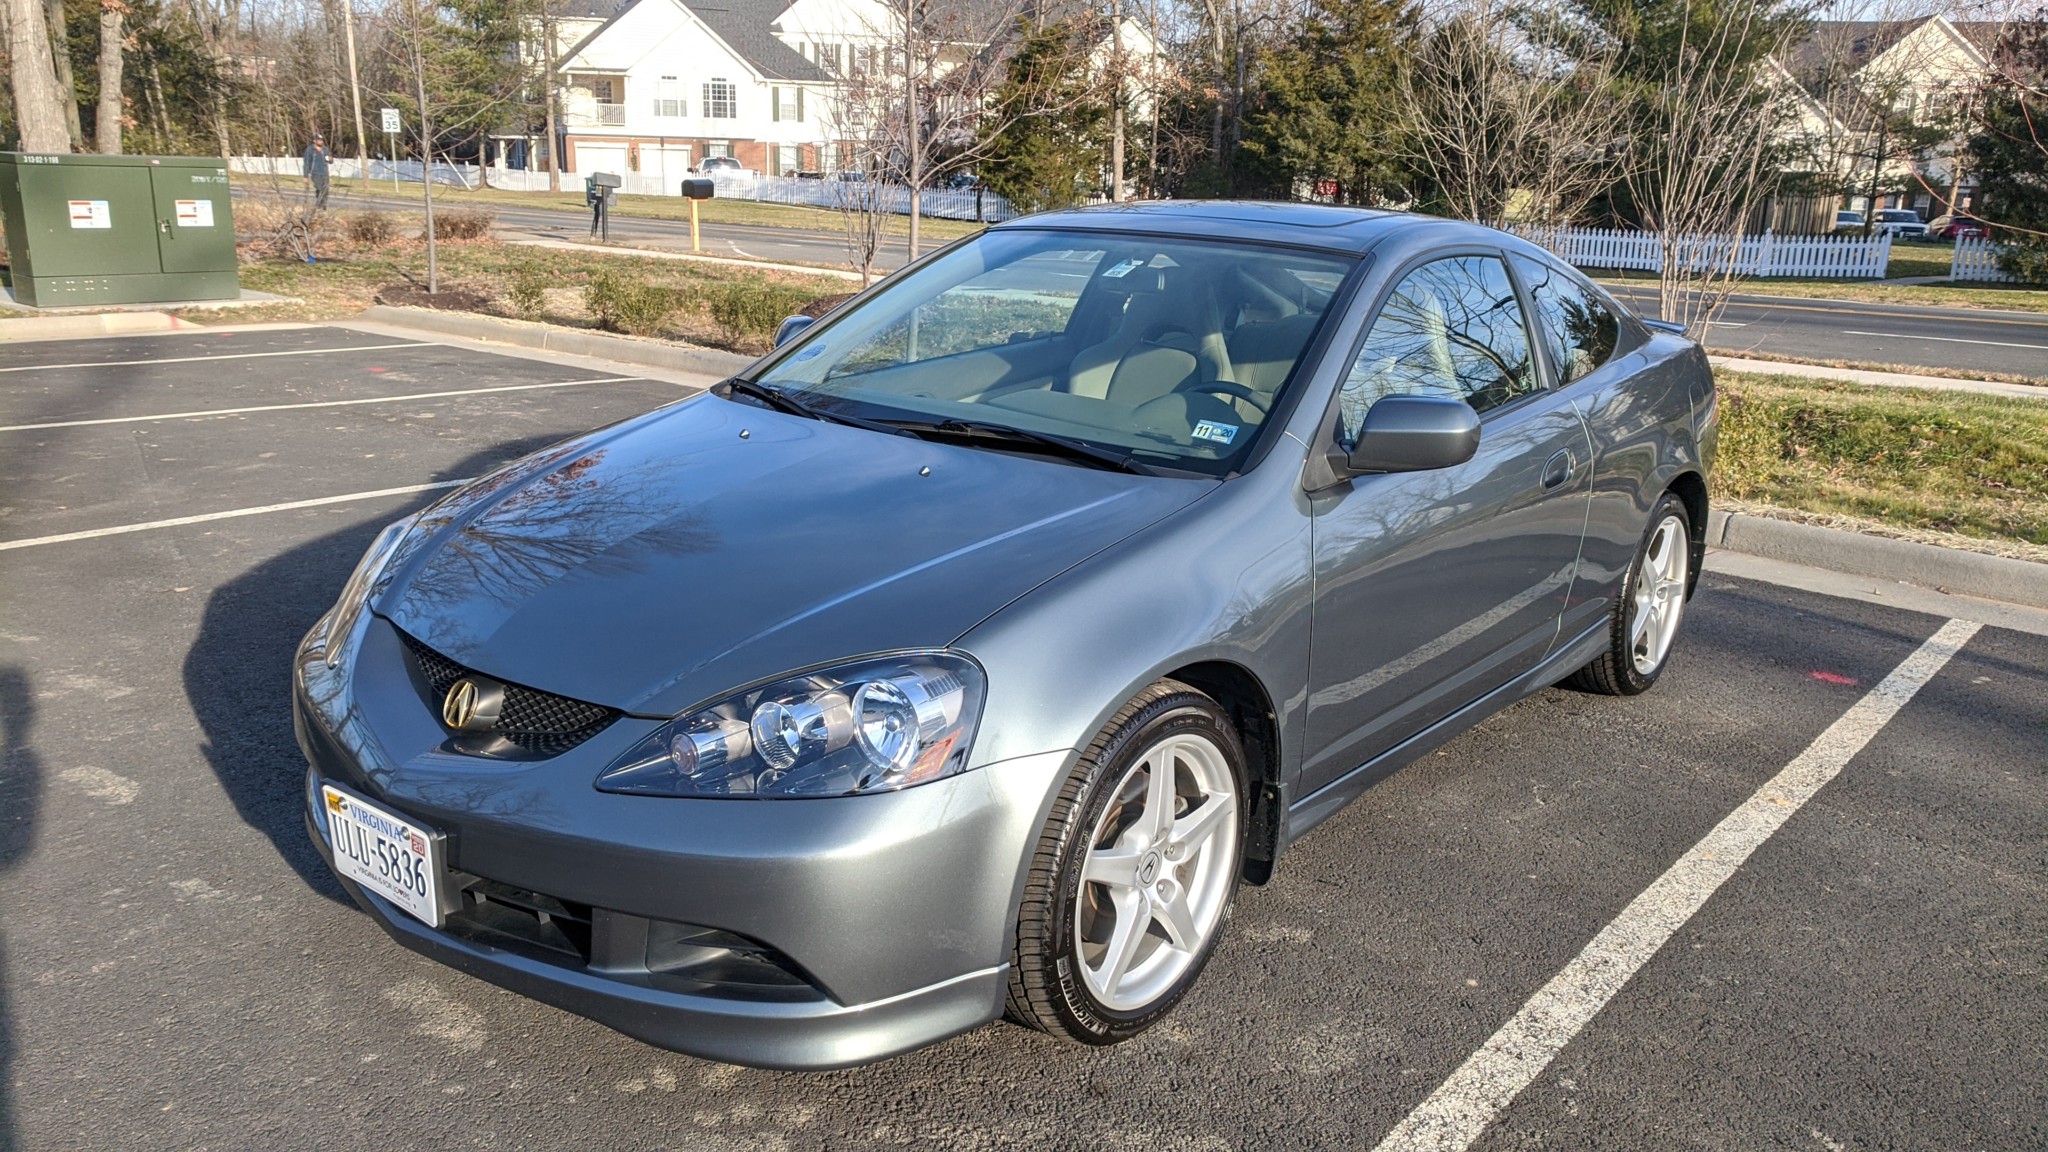 The 06 Acura Rsx Type S Was One Of The Finest Cars From Honda S Golden Era Carscoops